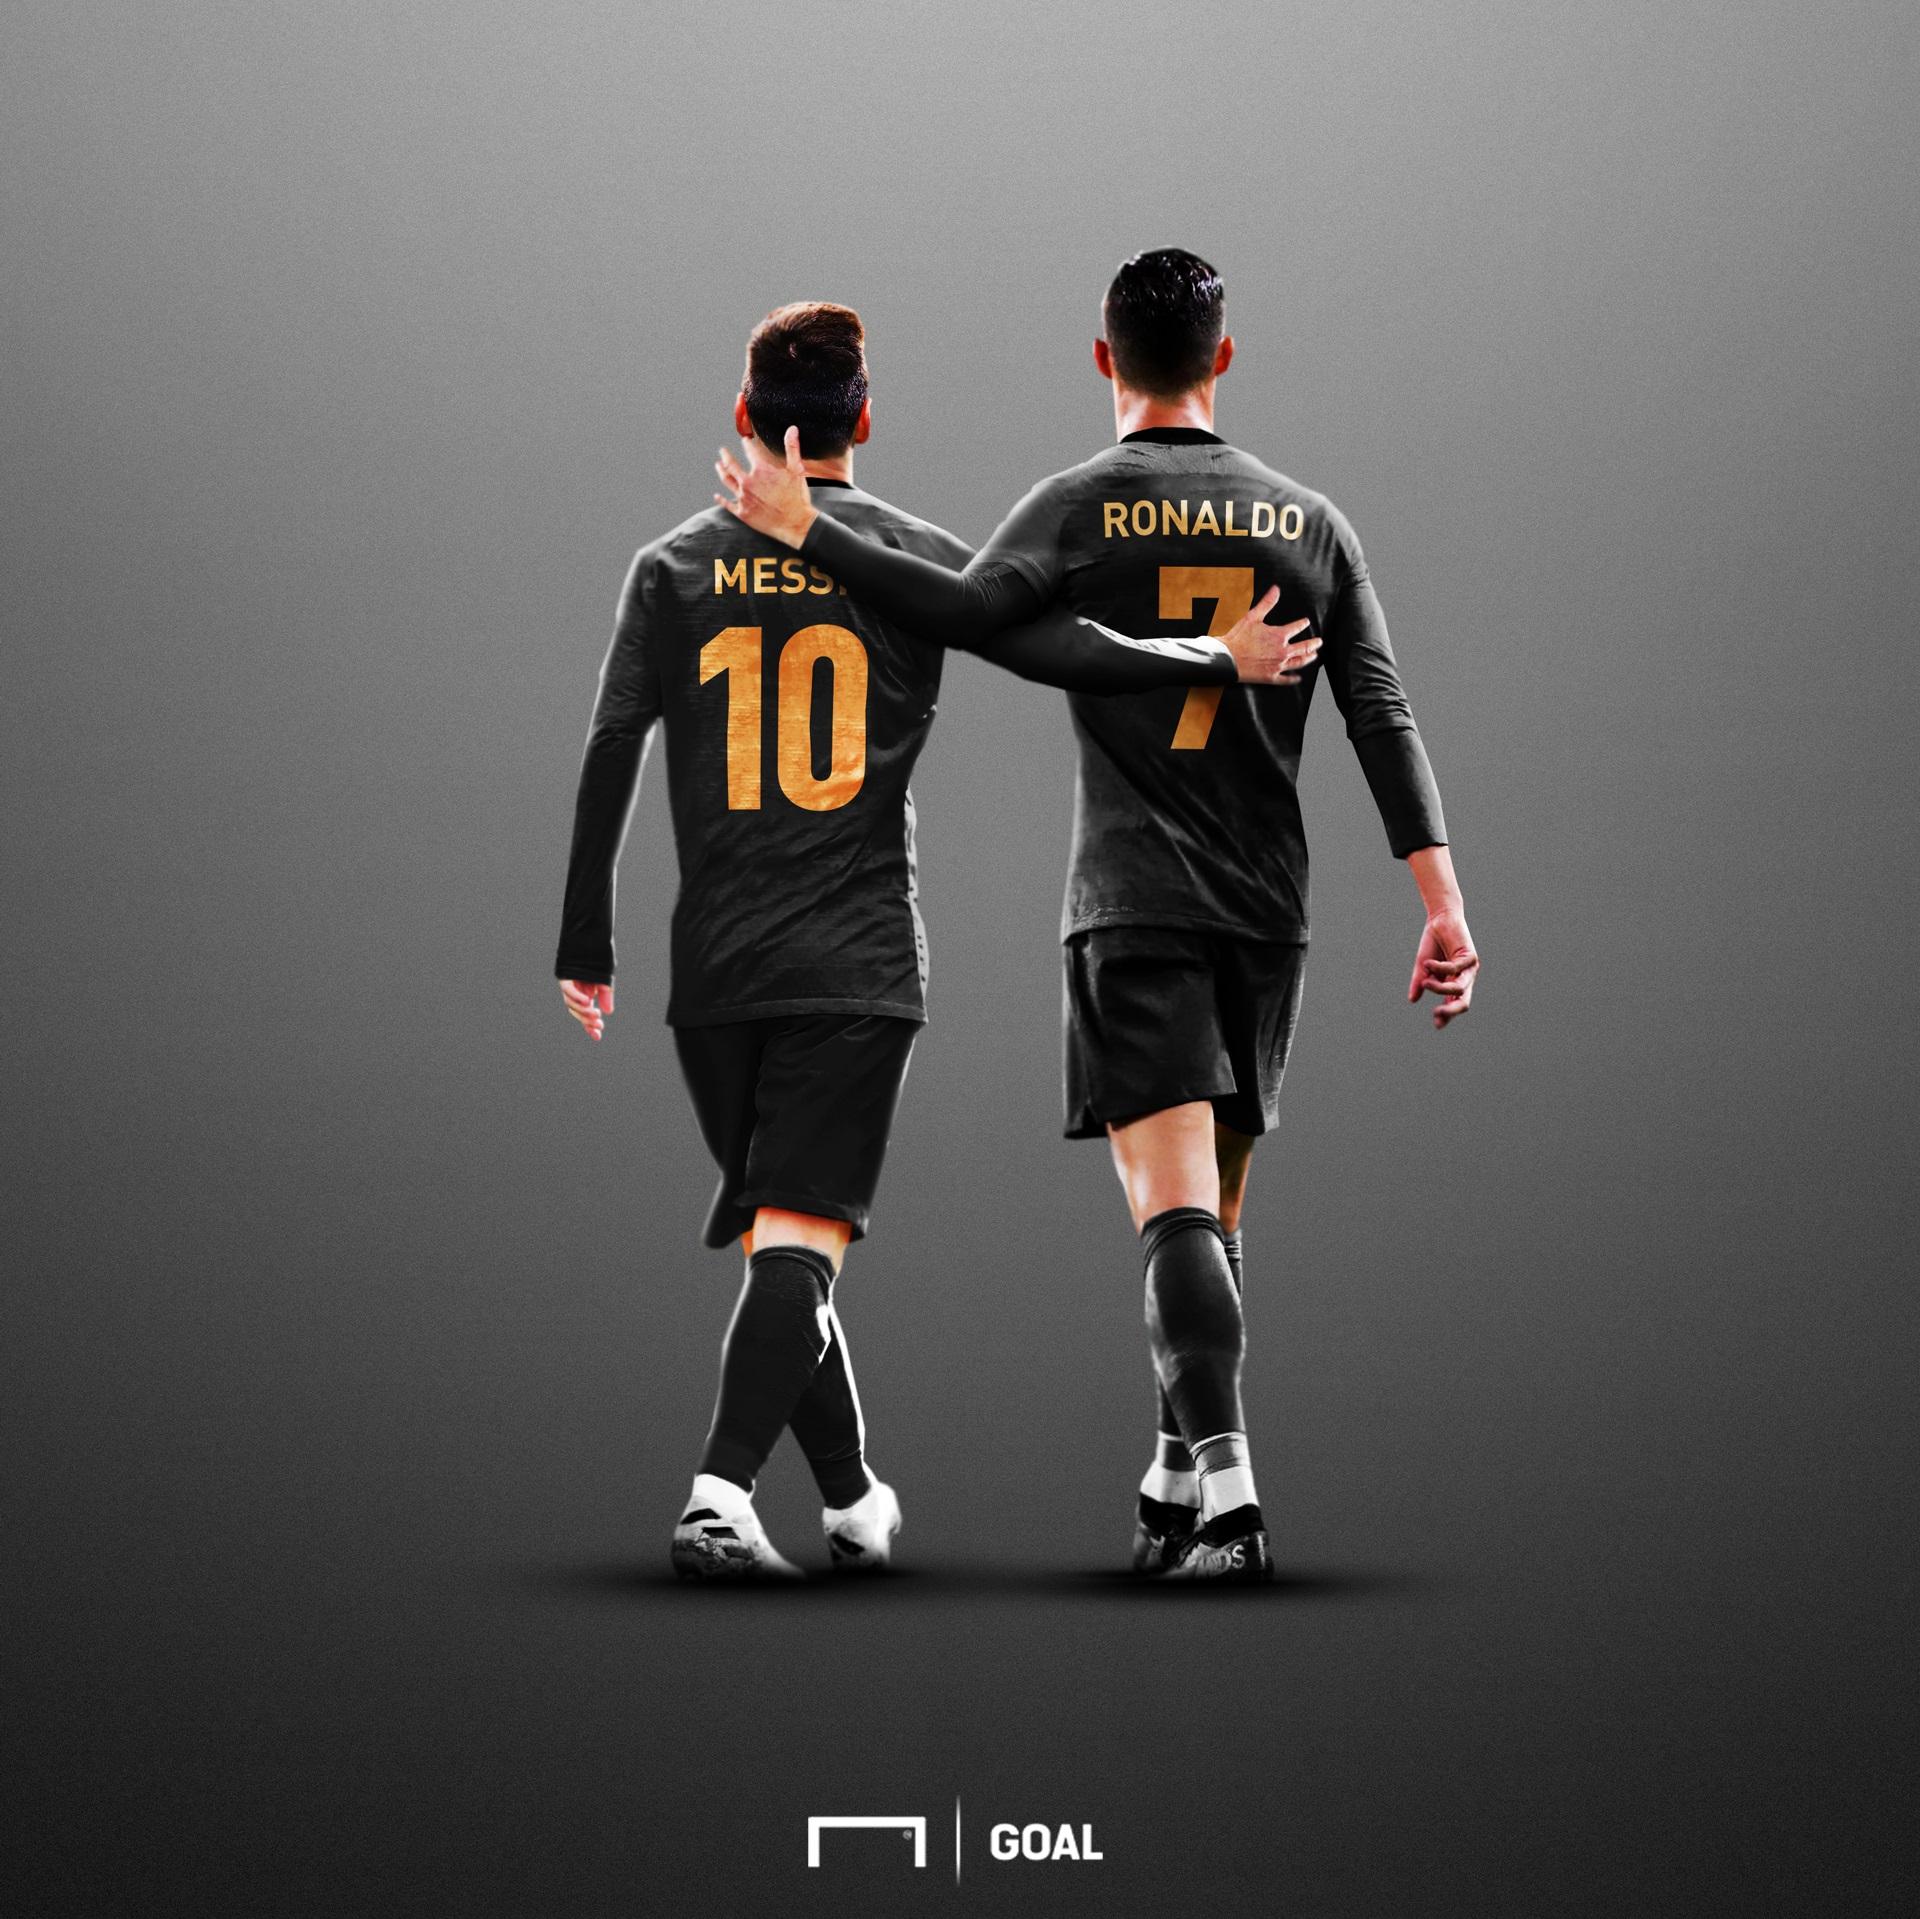 GOAL   Imagine if Messi and Ronaldo played in the same